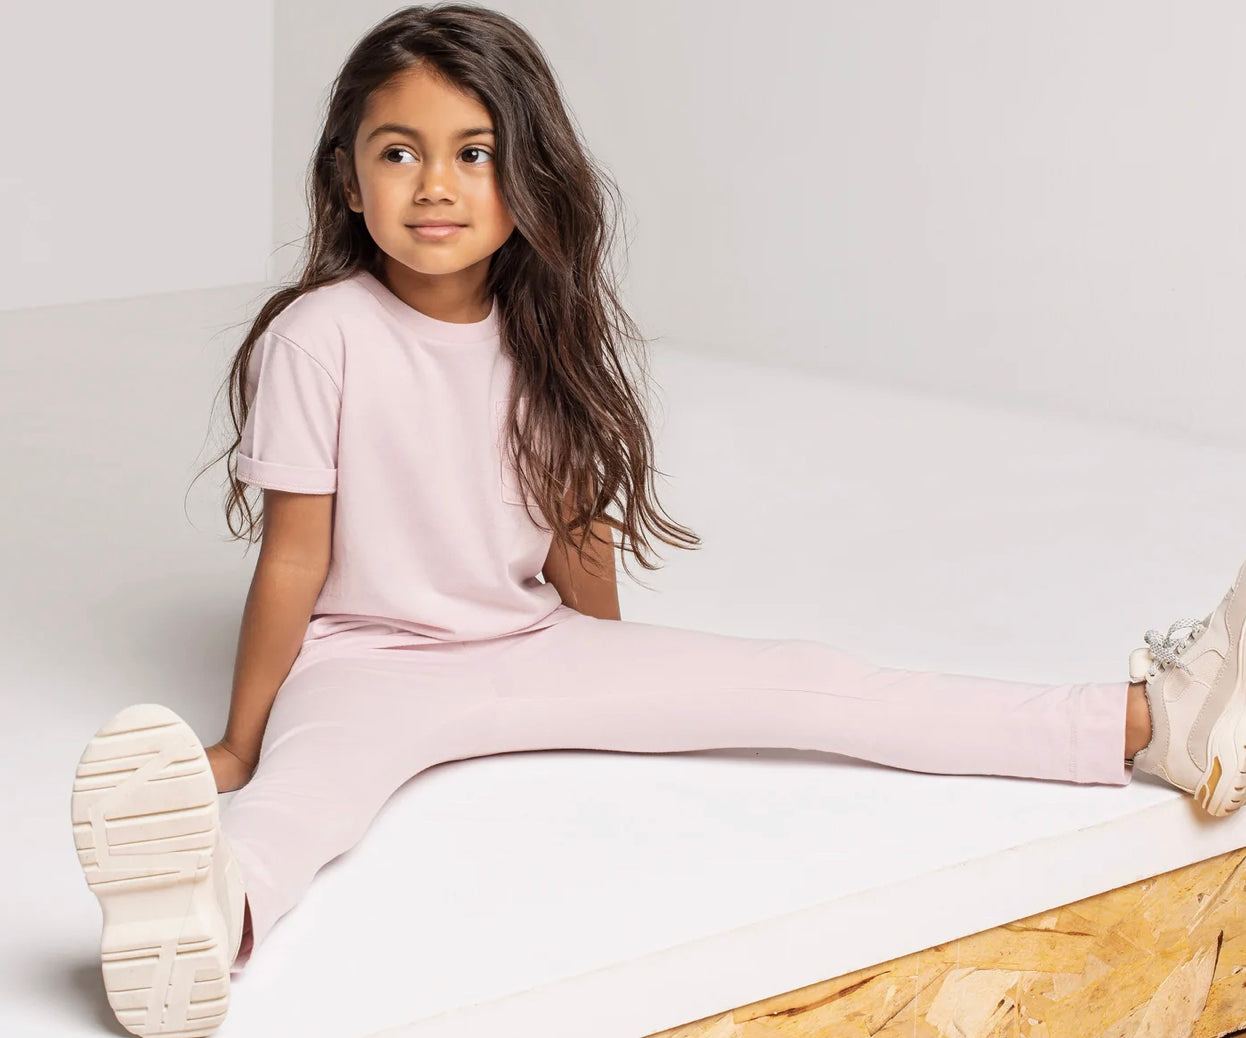 Miles the Label | Miles Basics Cloudy Pink Leggings